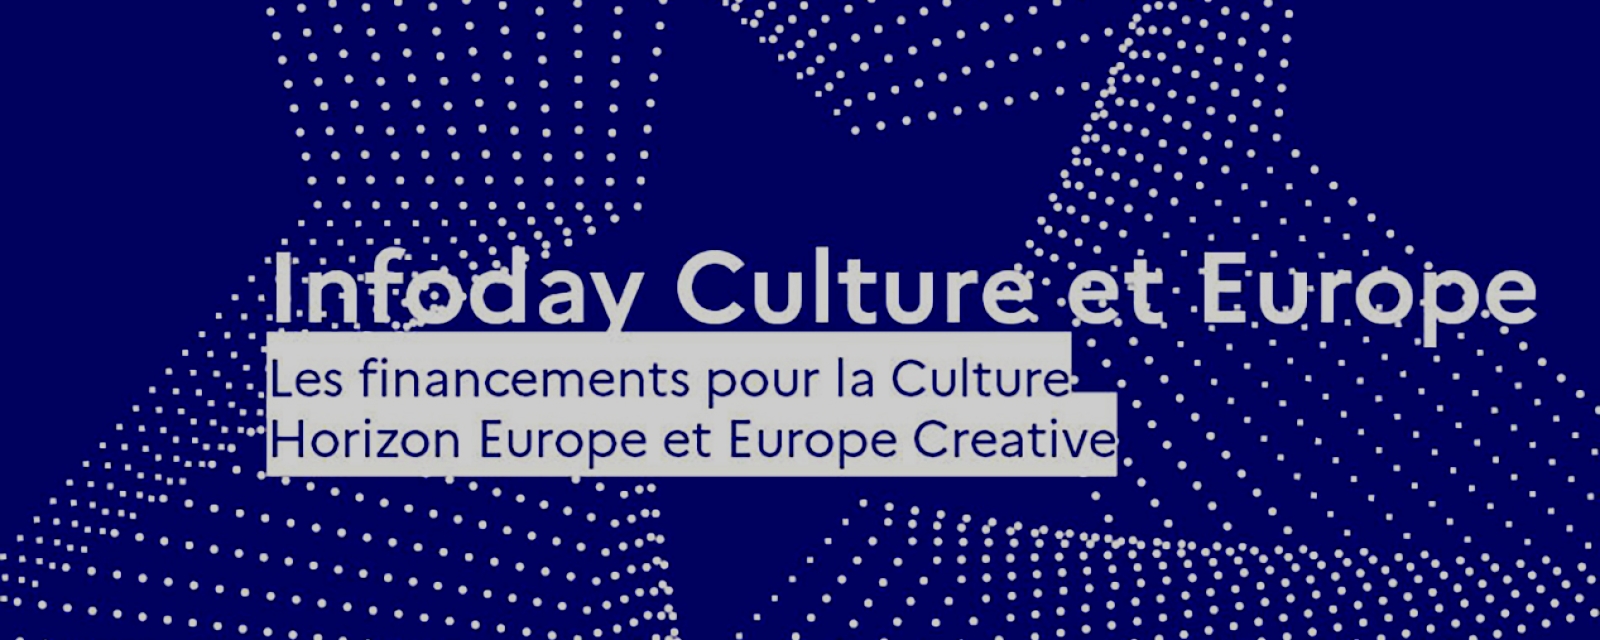 infoday-culture-europe